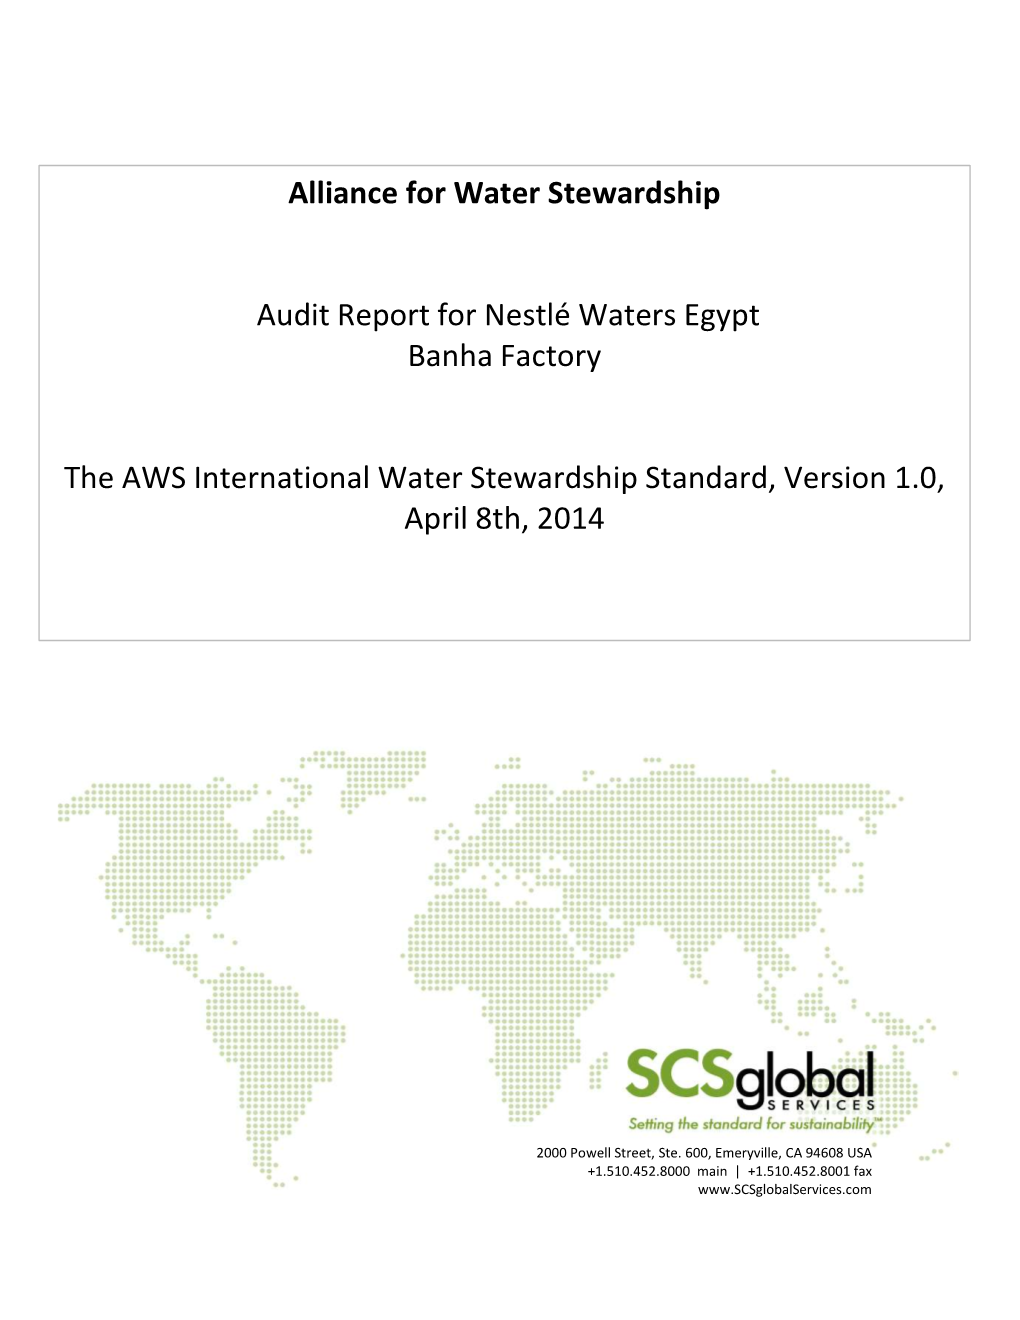 Alliance for Water Stewardship Audit Report for Nestlé Waters Egypt